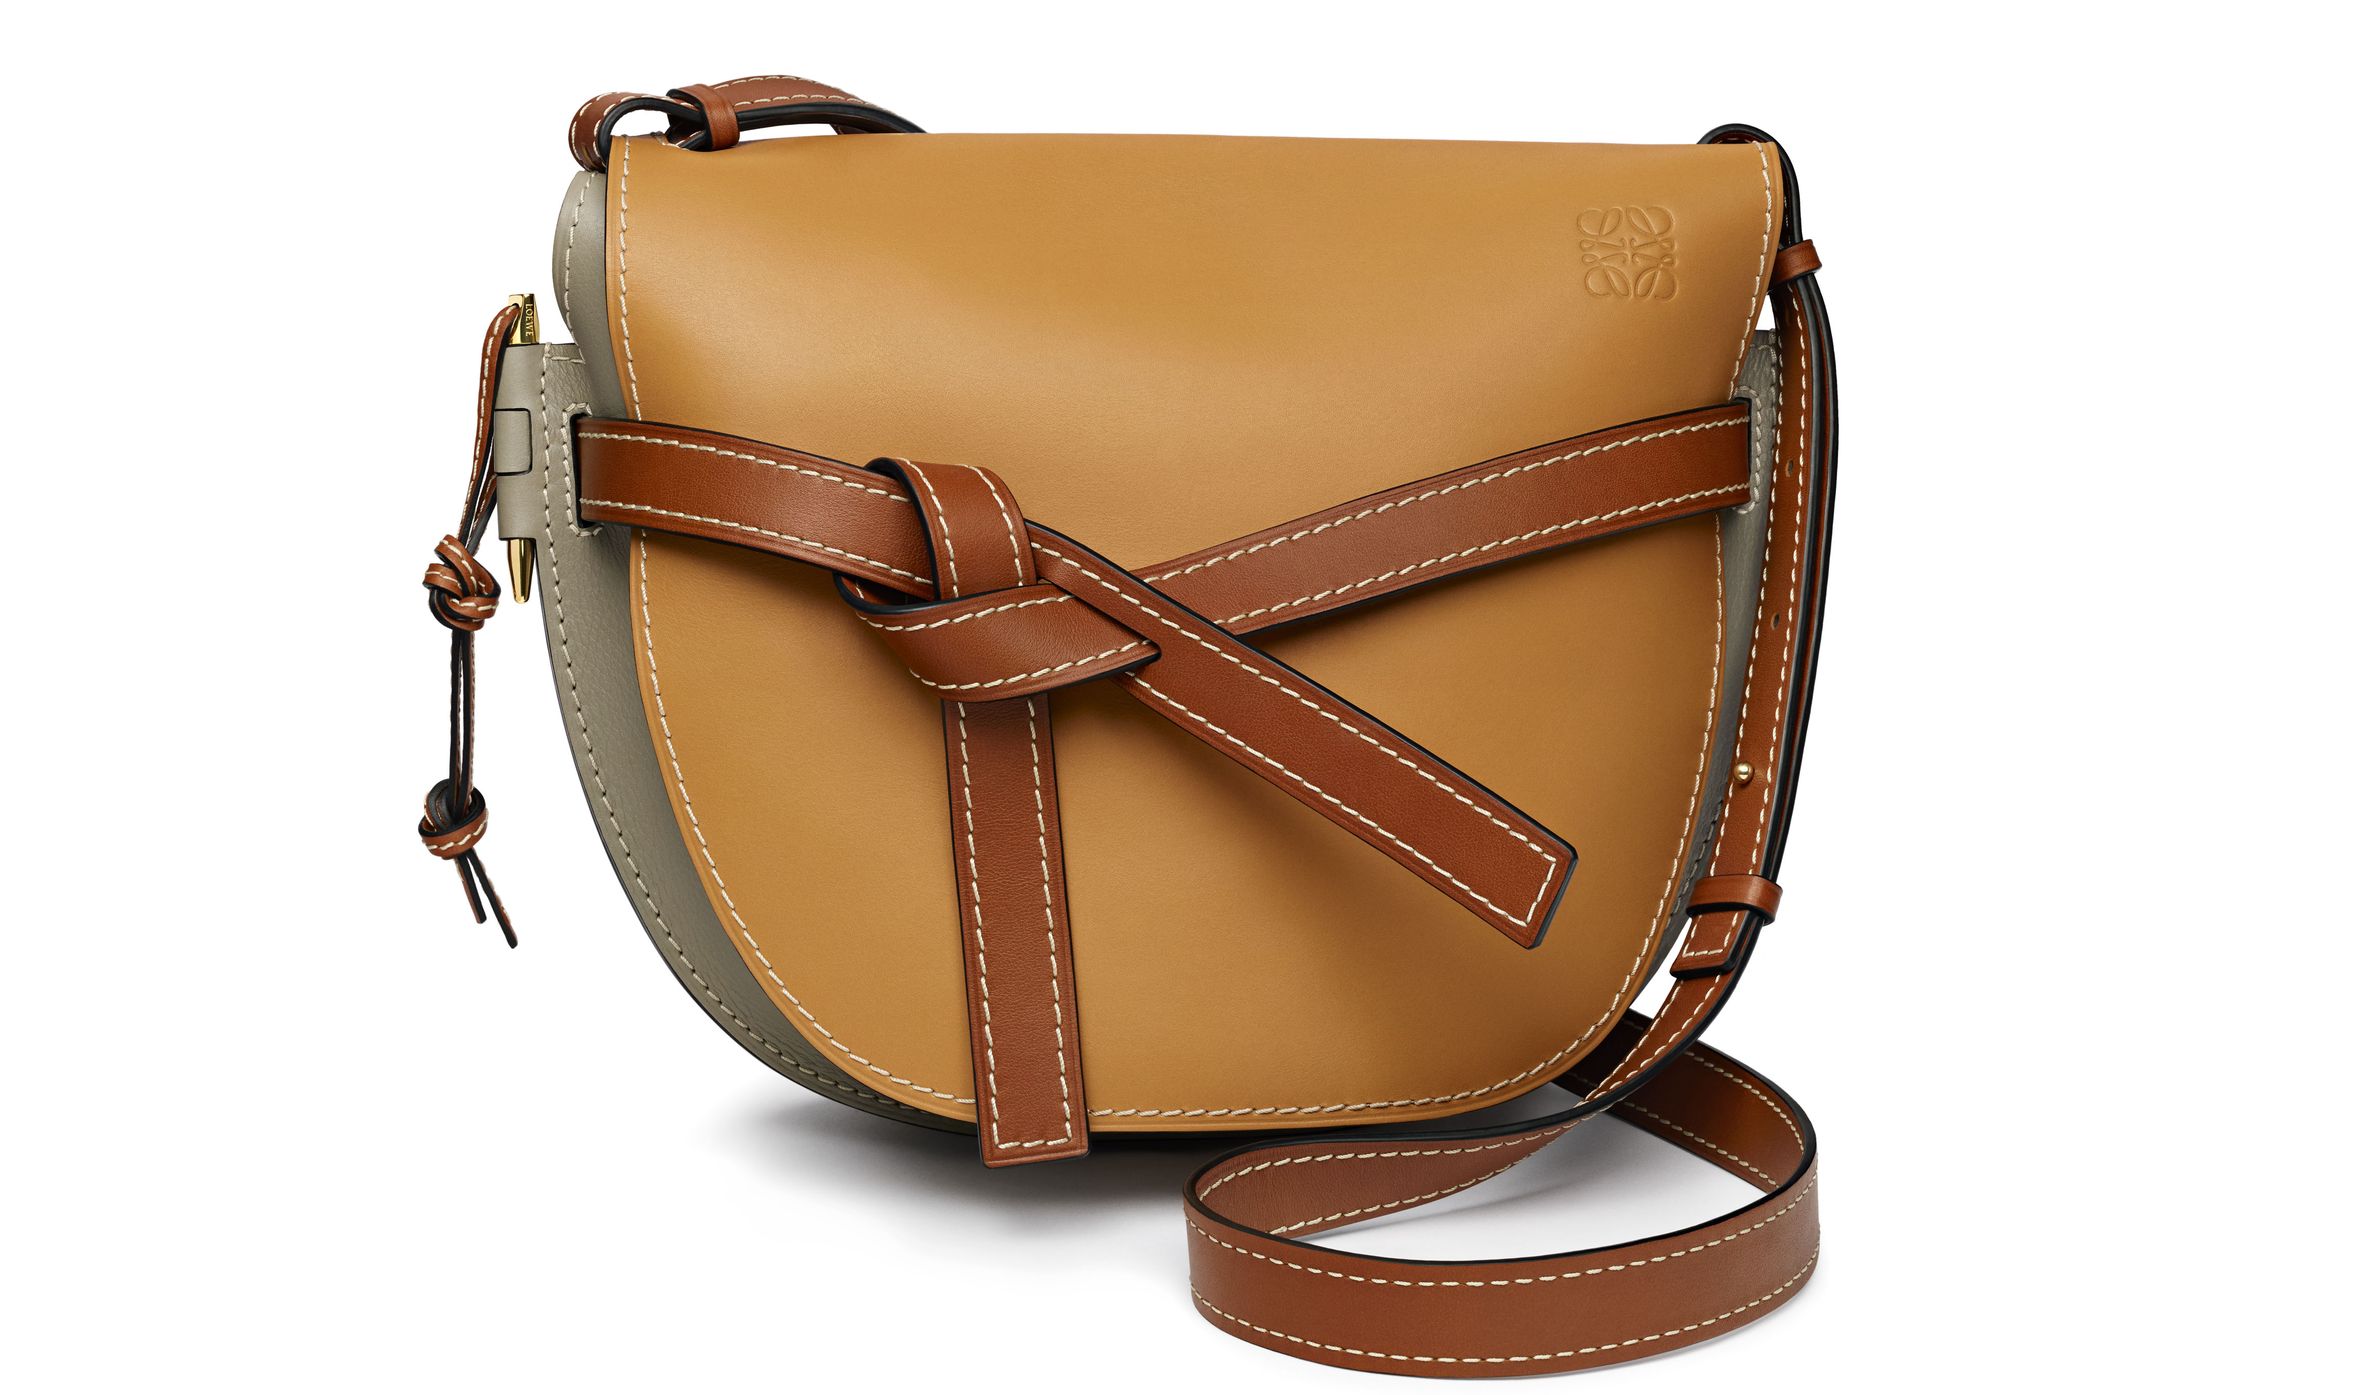 Saddle-shaped Gate bag is skillfully handcrafted from high-end leathers, designed to wear beautifully over time. 